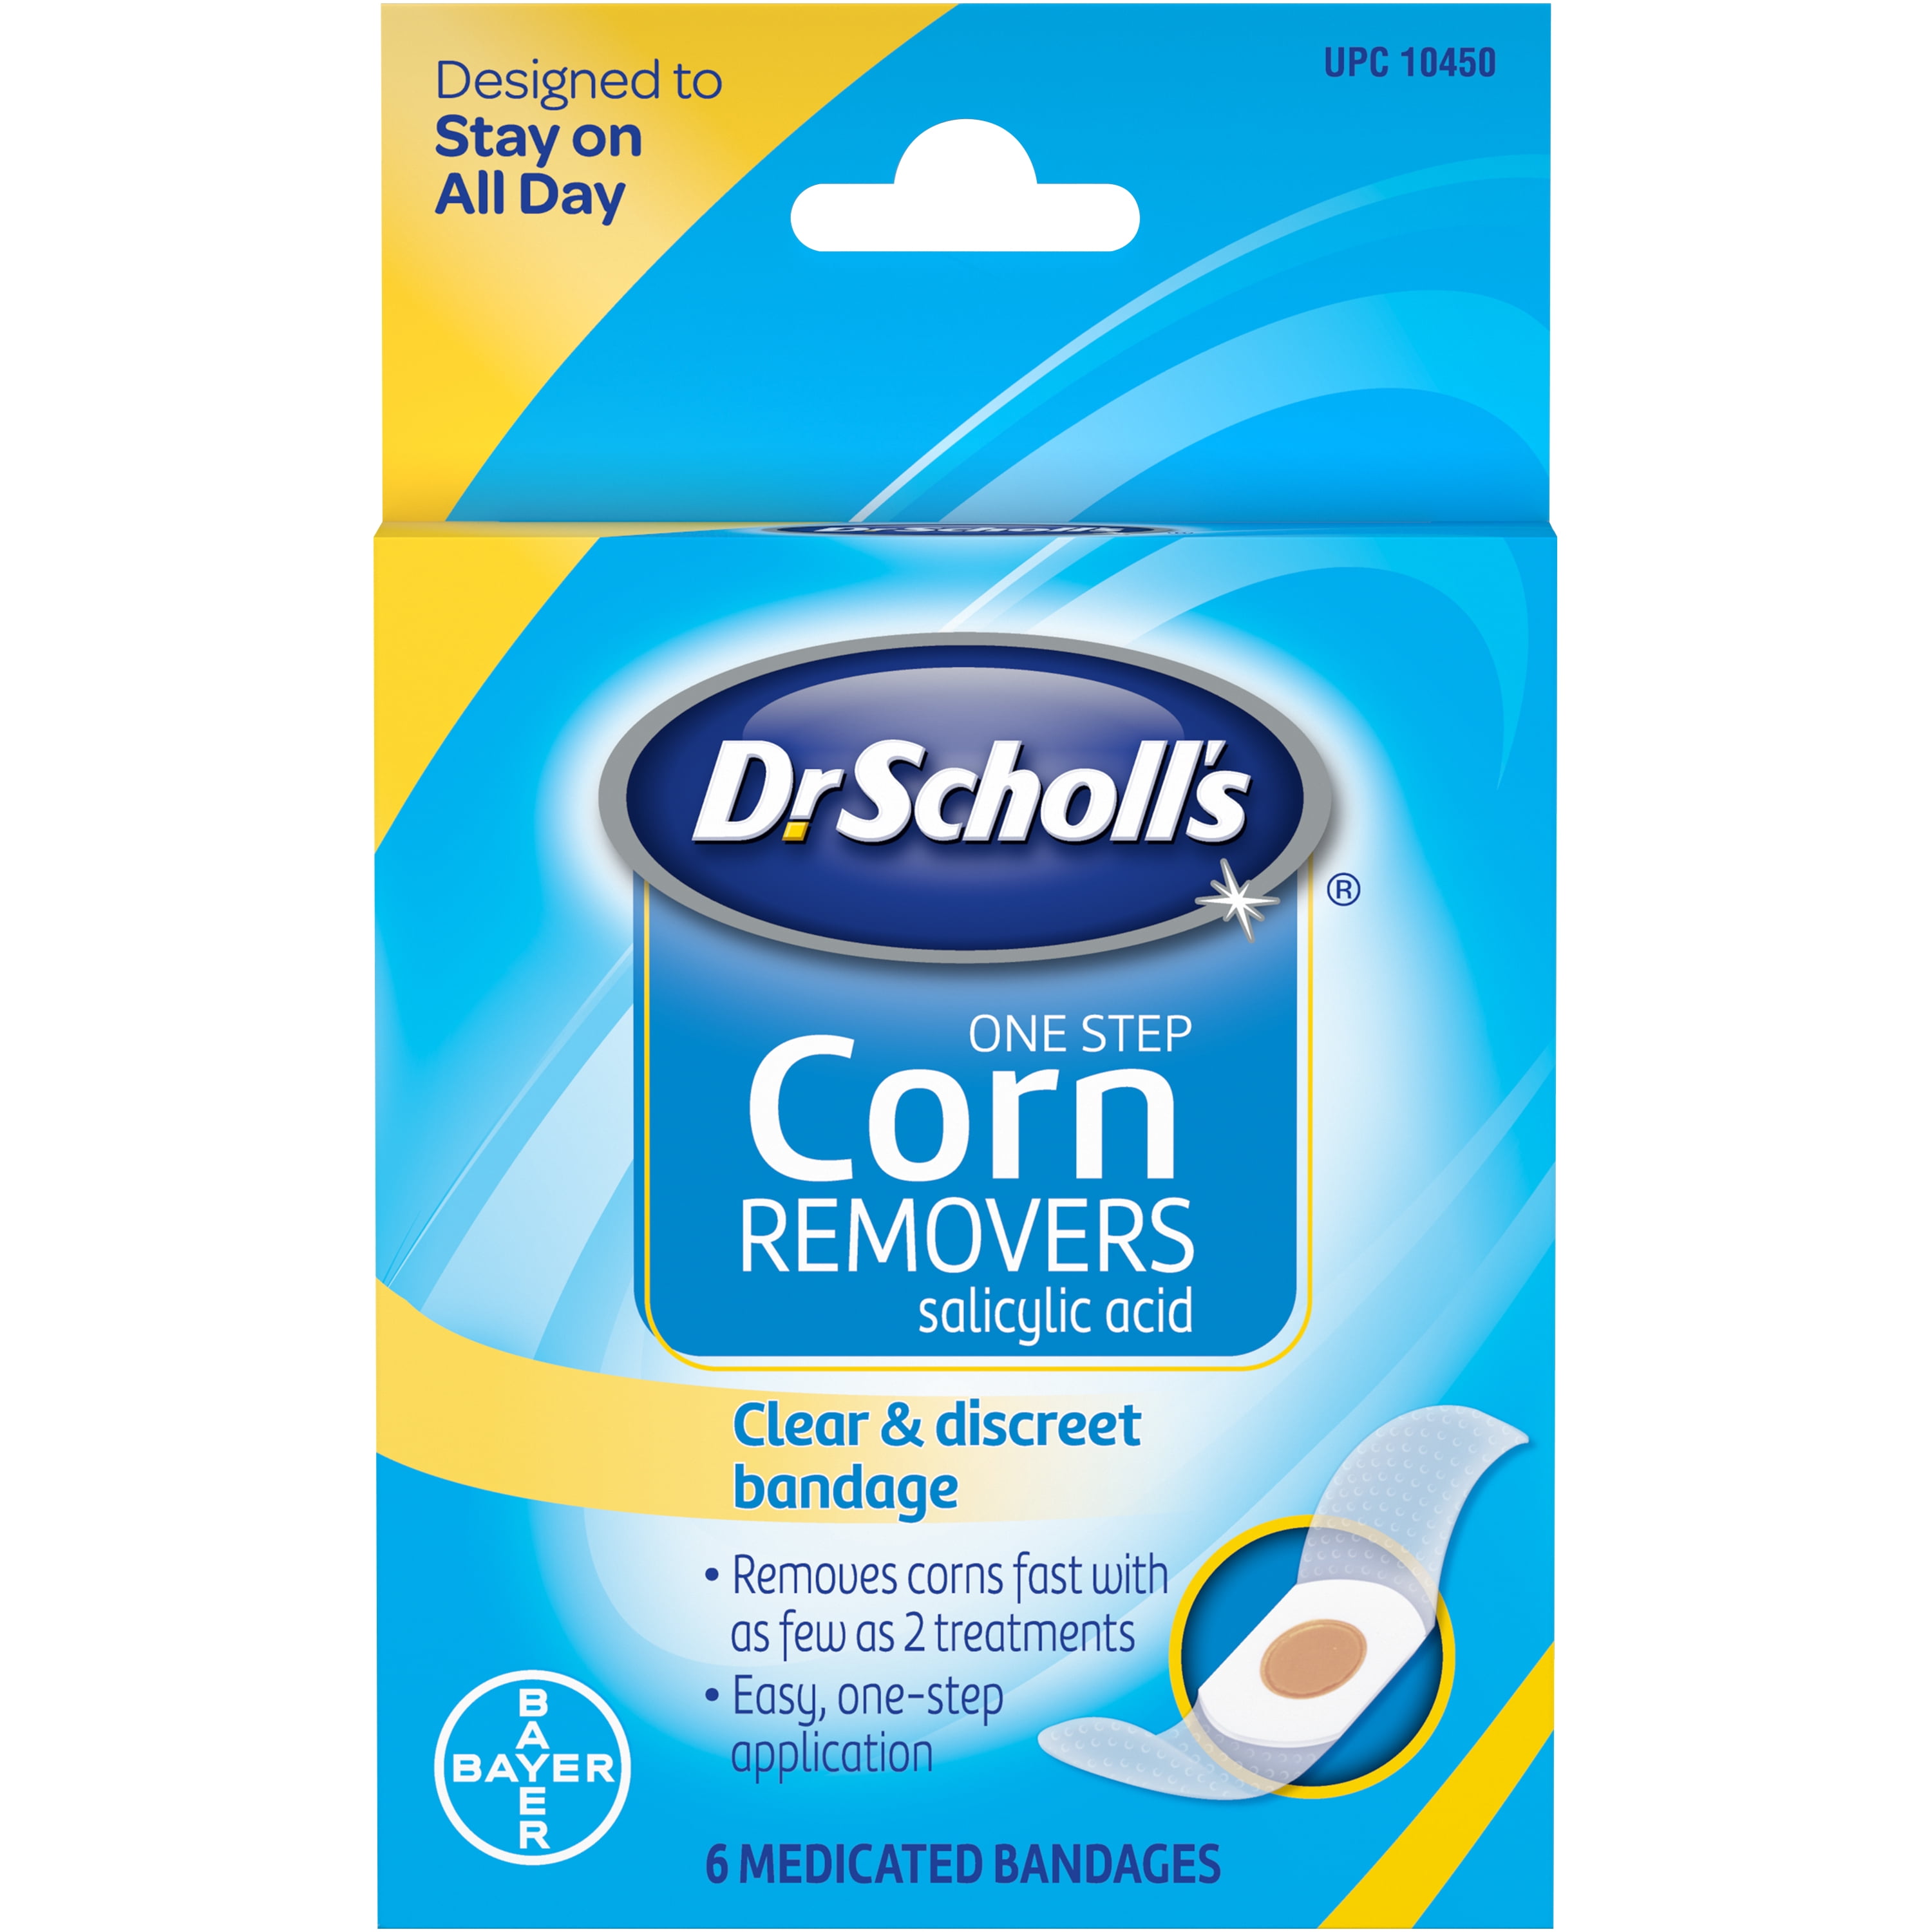 Dr Scholls Corn Remover Before And After